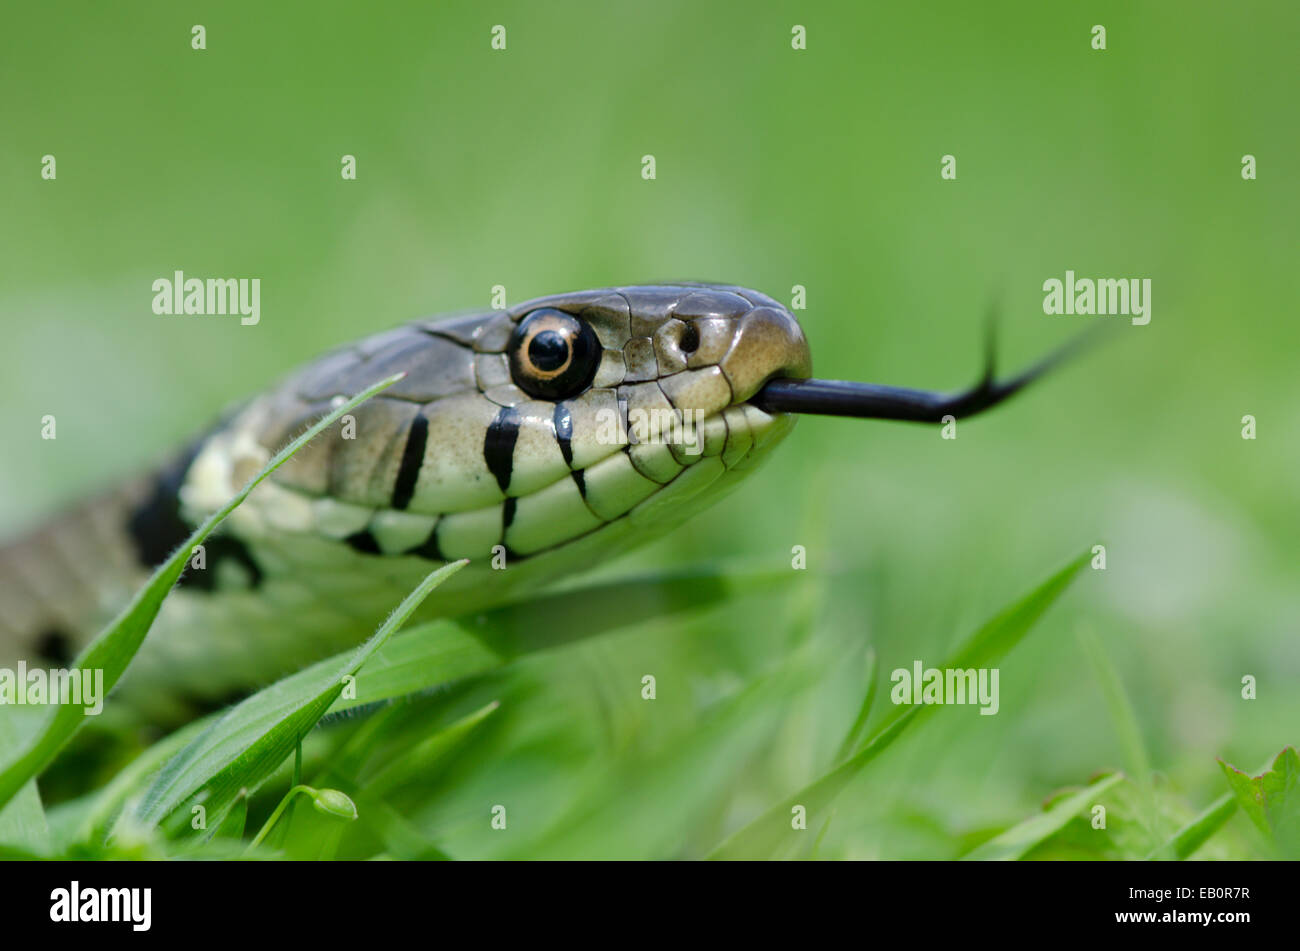 Grass snake [Natrix natrix] in grass flicking forked tongue to taste the air. Sussex, UK. Stock Photo